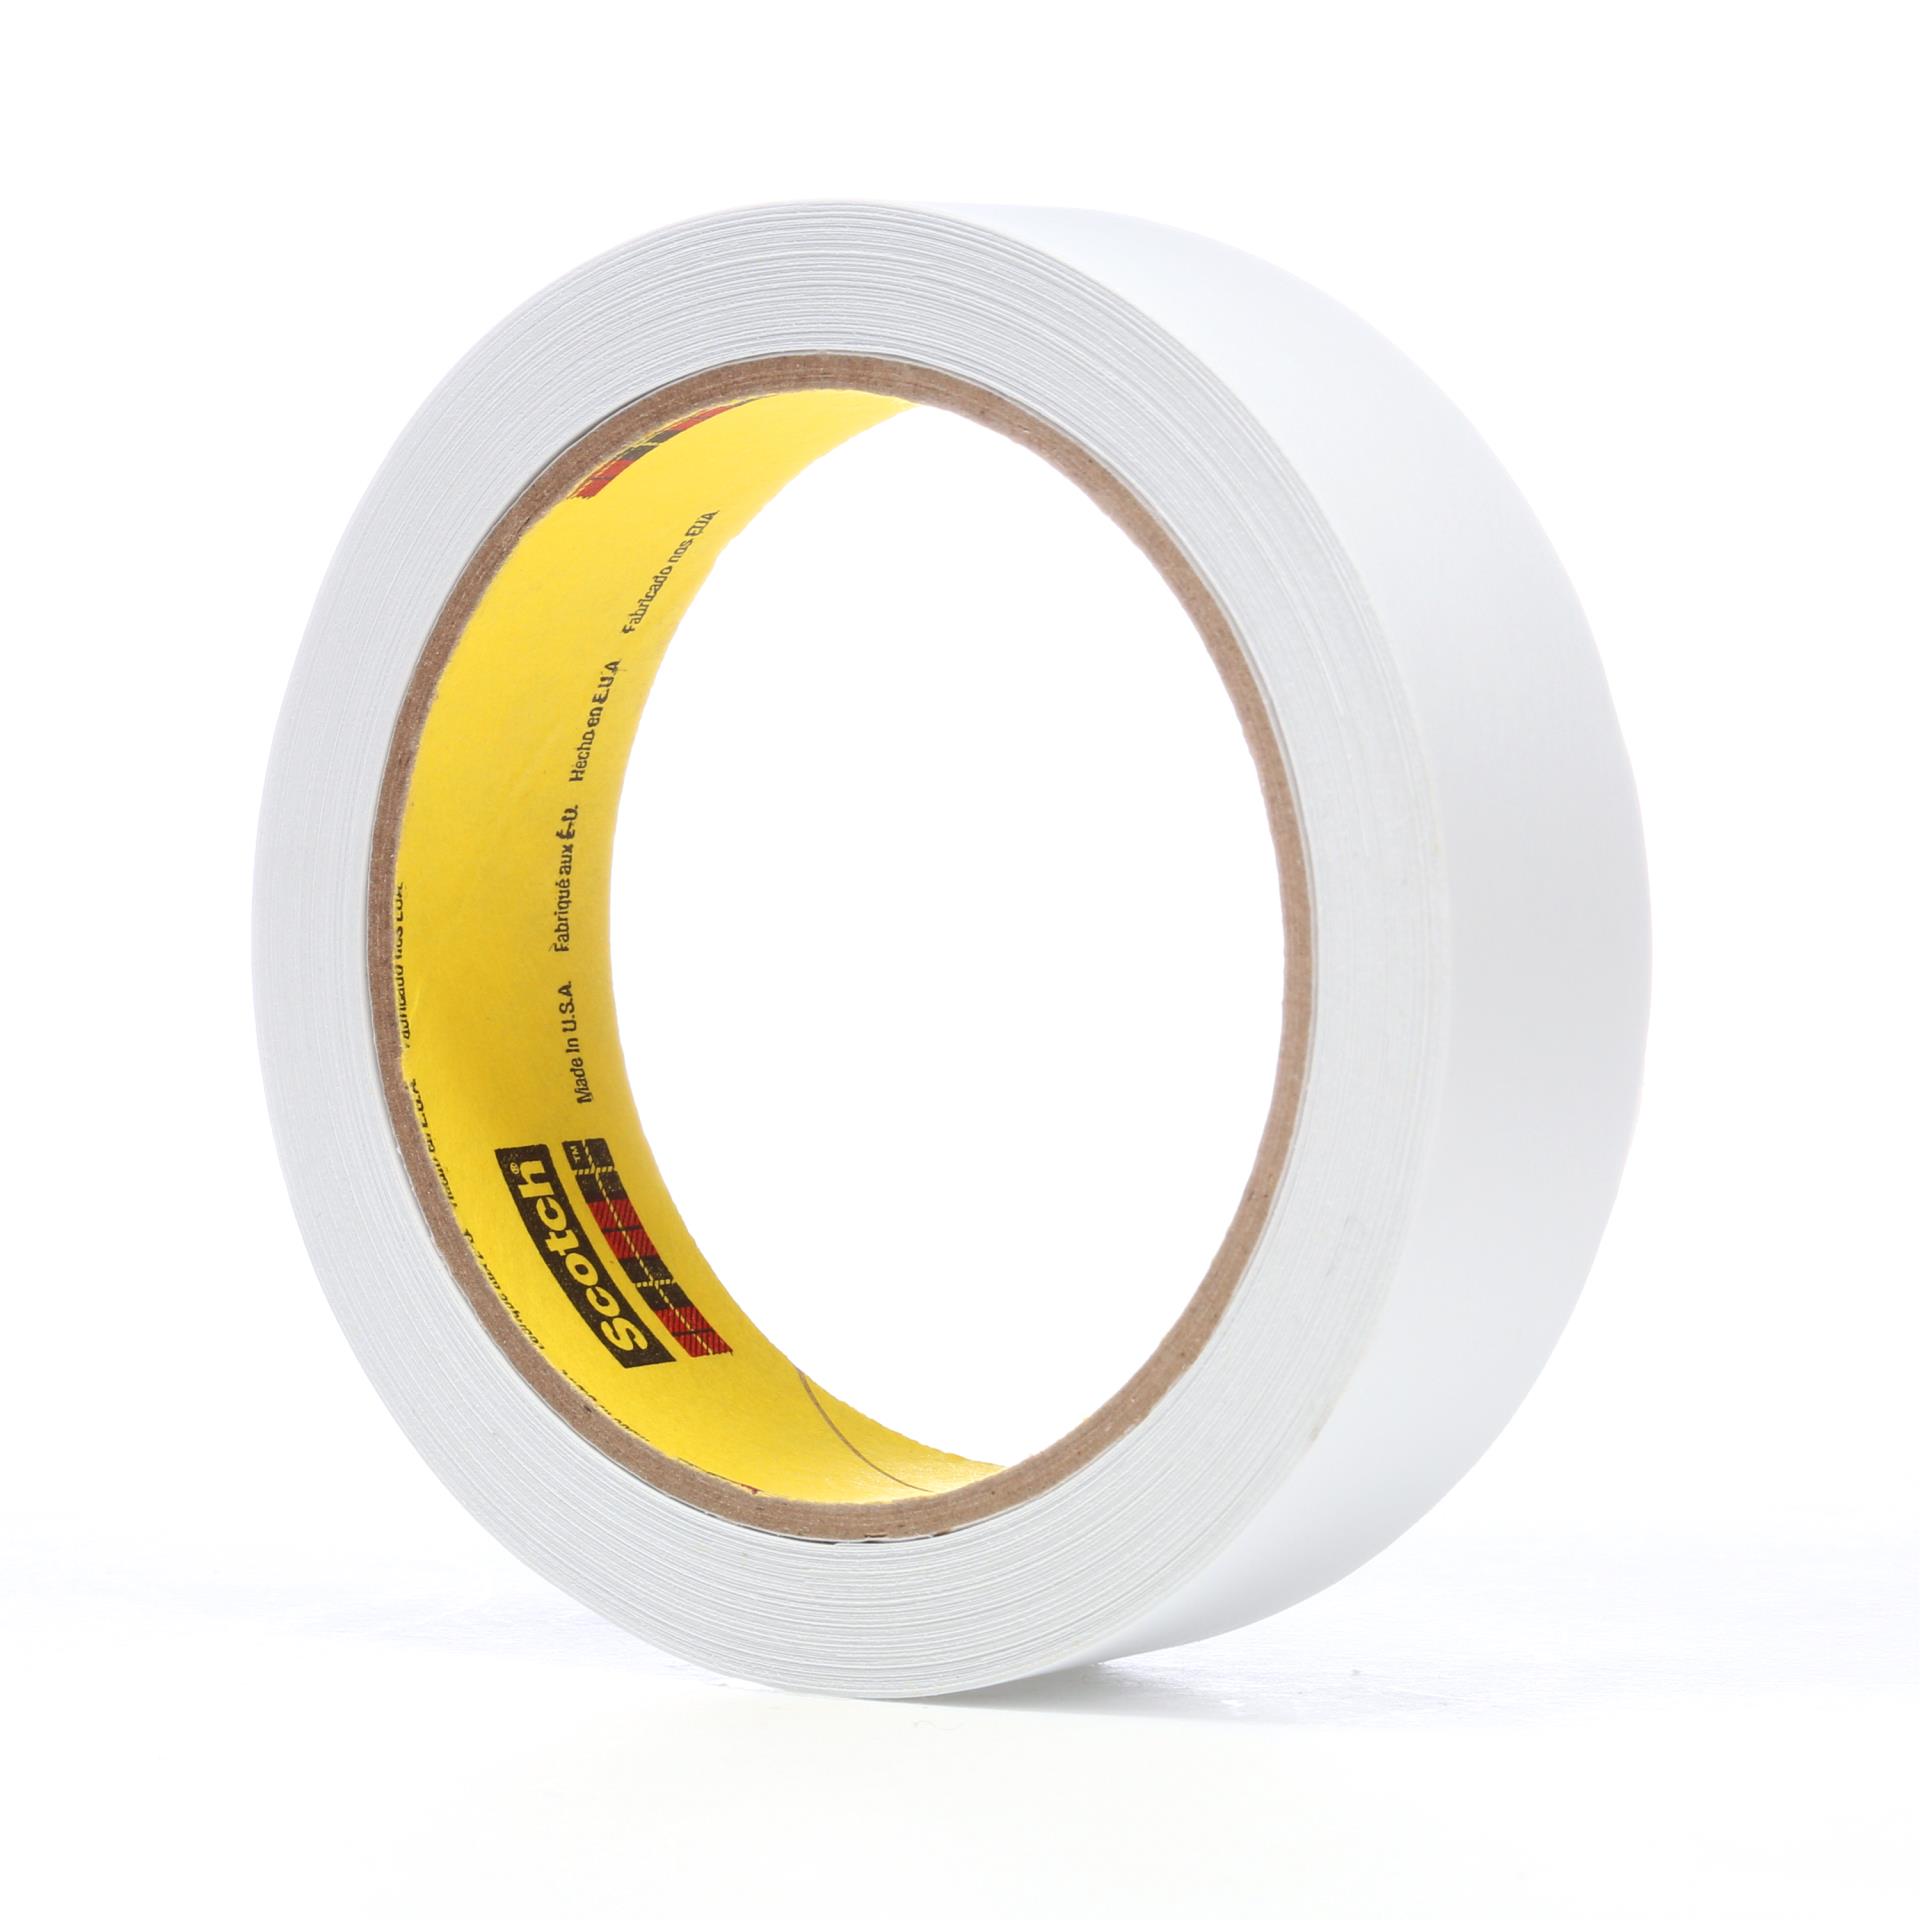 3M VHB F9473PC Adhesive Transfer Tape in x 180 ft. Transparent Tape Roll for Permanent Bonding. Adhesive Tapes - 2